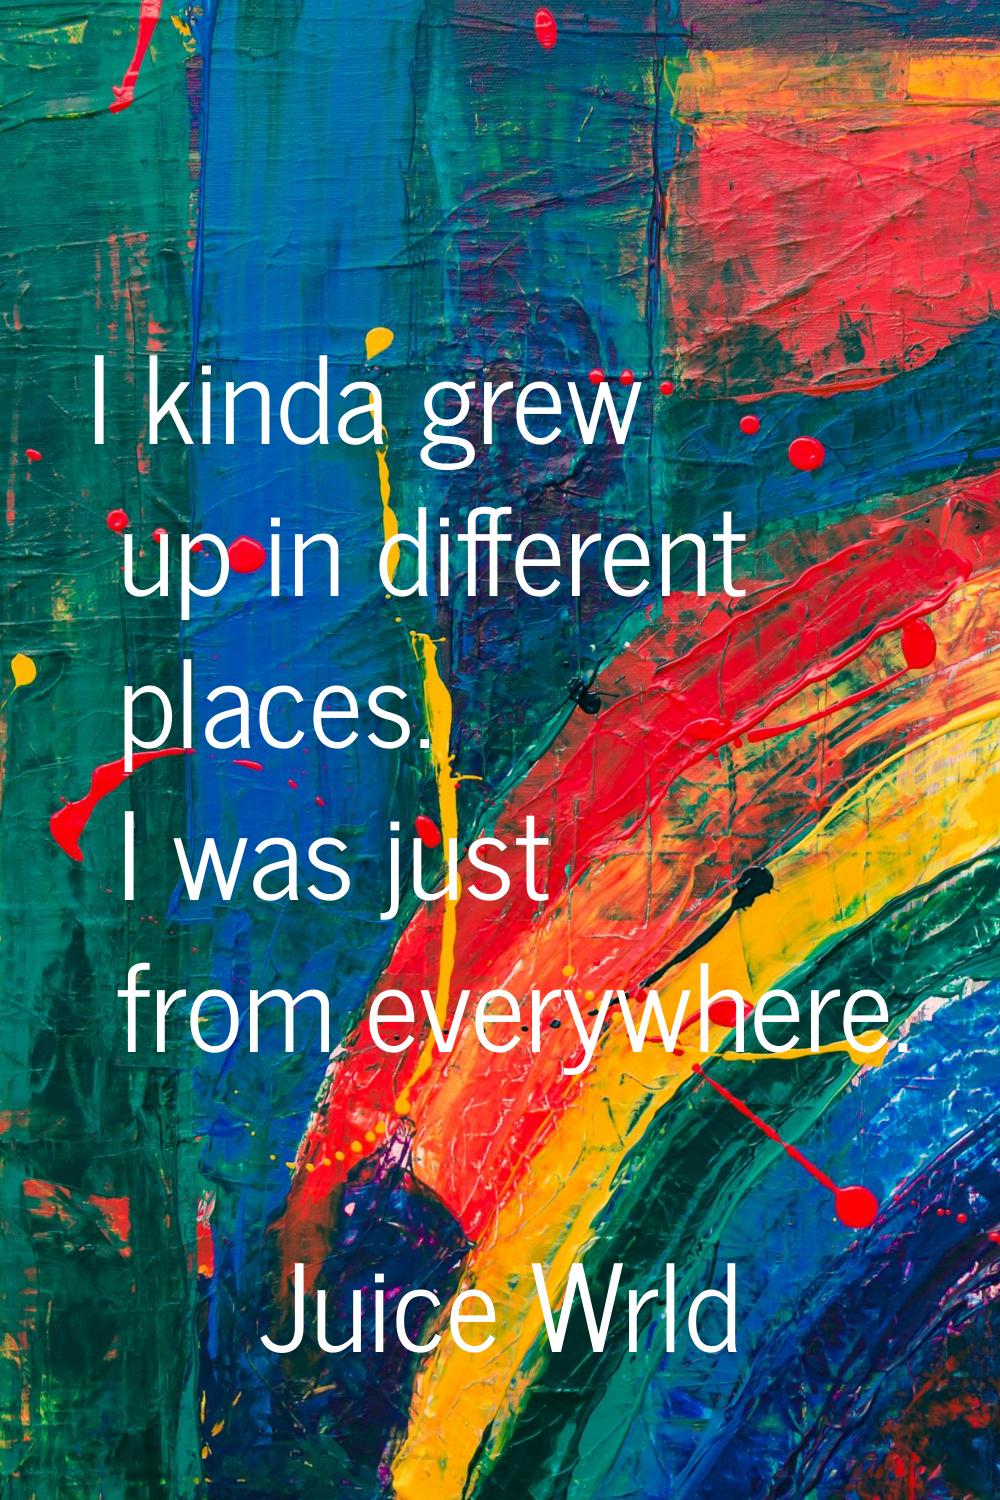 I kinda grew up in different places. I was just from everywhere.